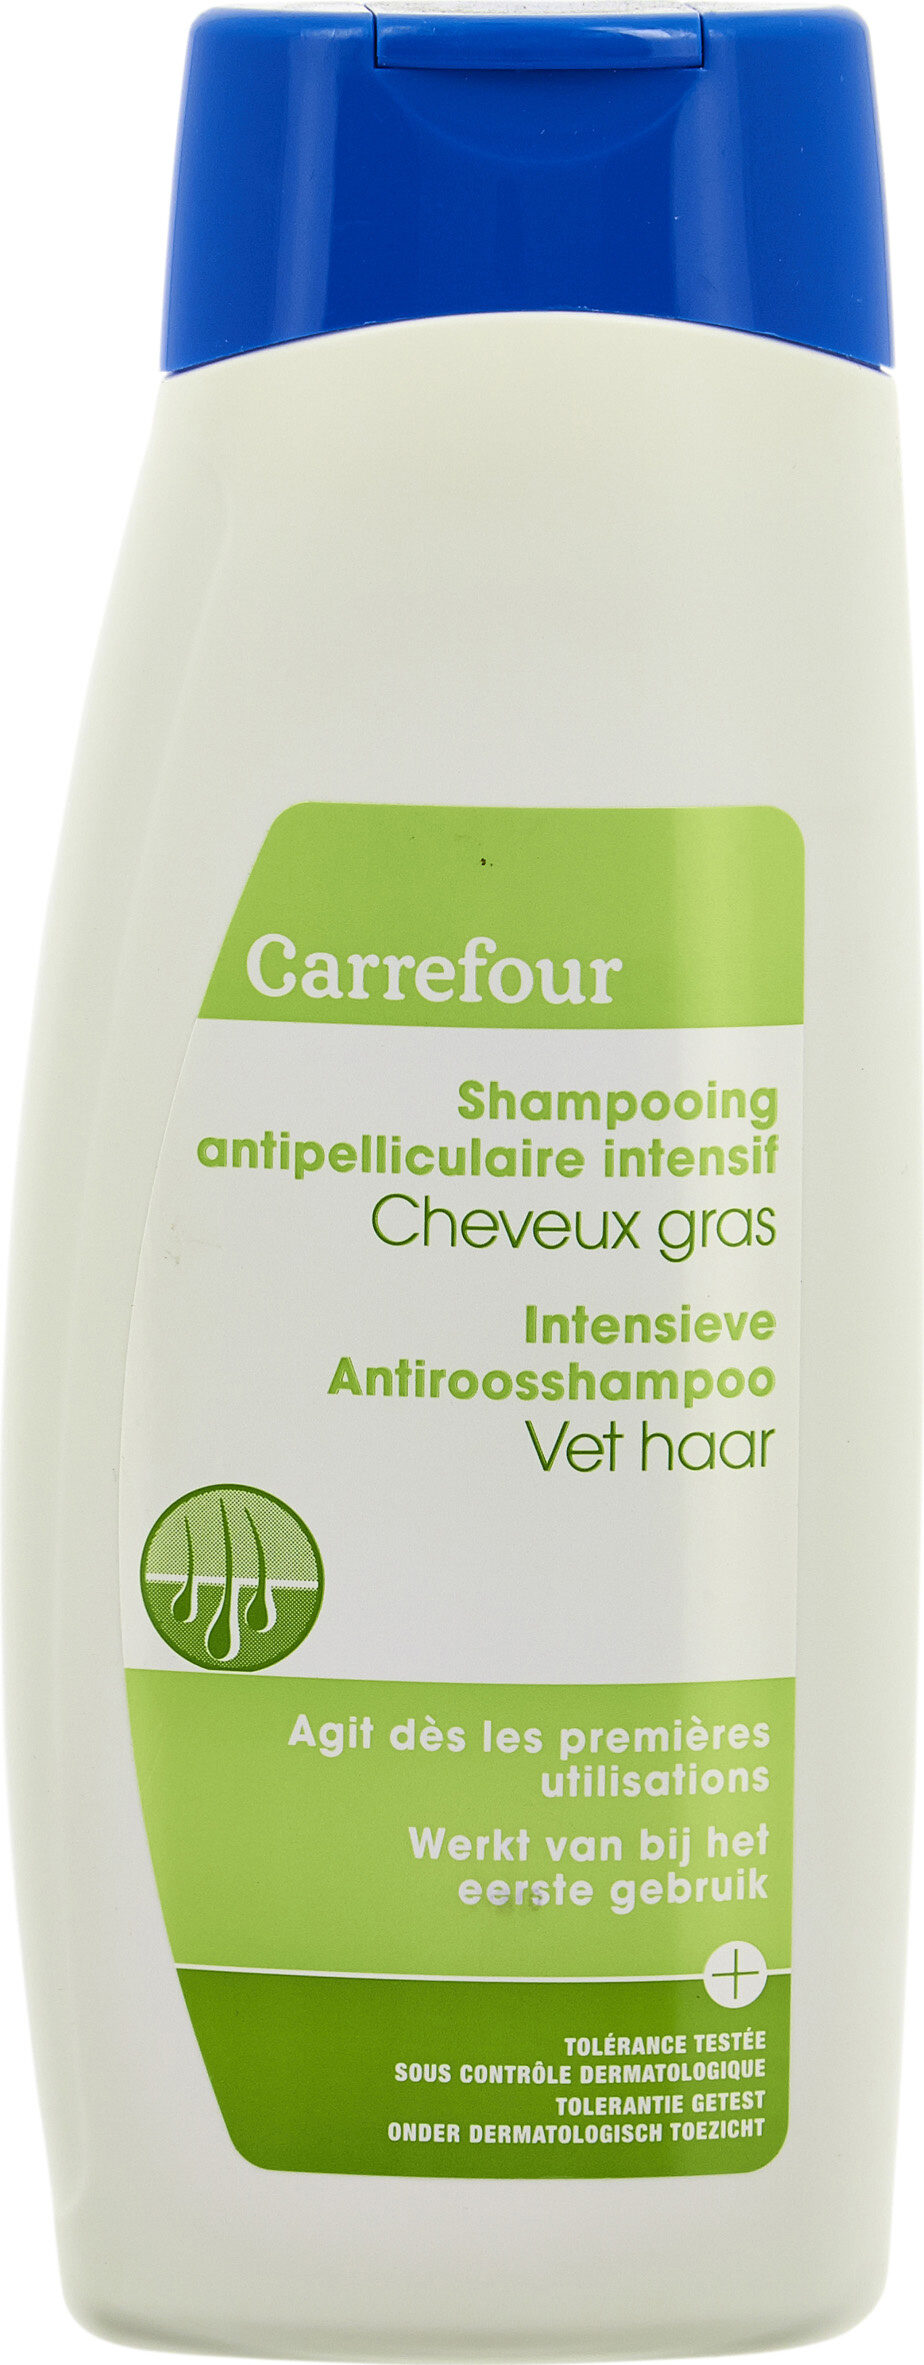 Shampooing antipelliculaire intensif Cheveux gras - Tuote - fr